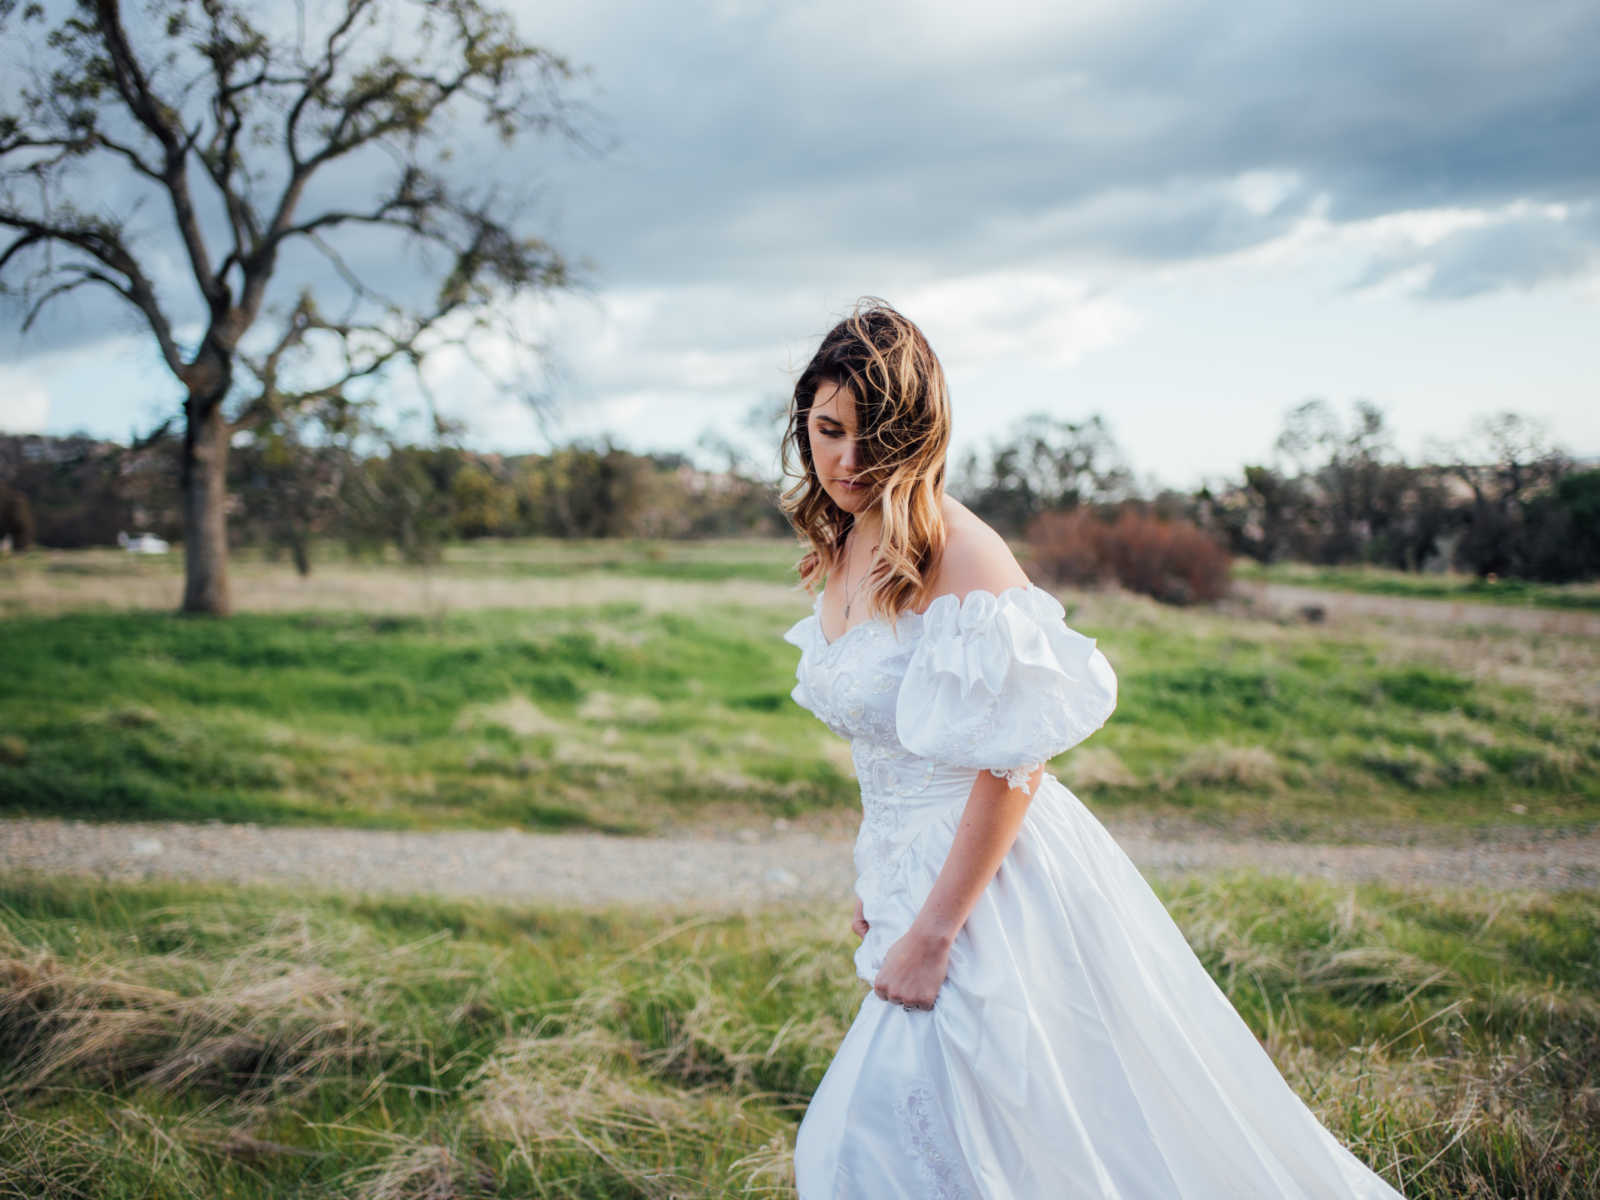 Daughter wears deceased mother's wedding gown with wind blown hair